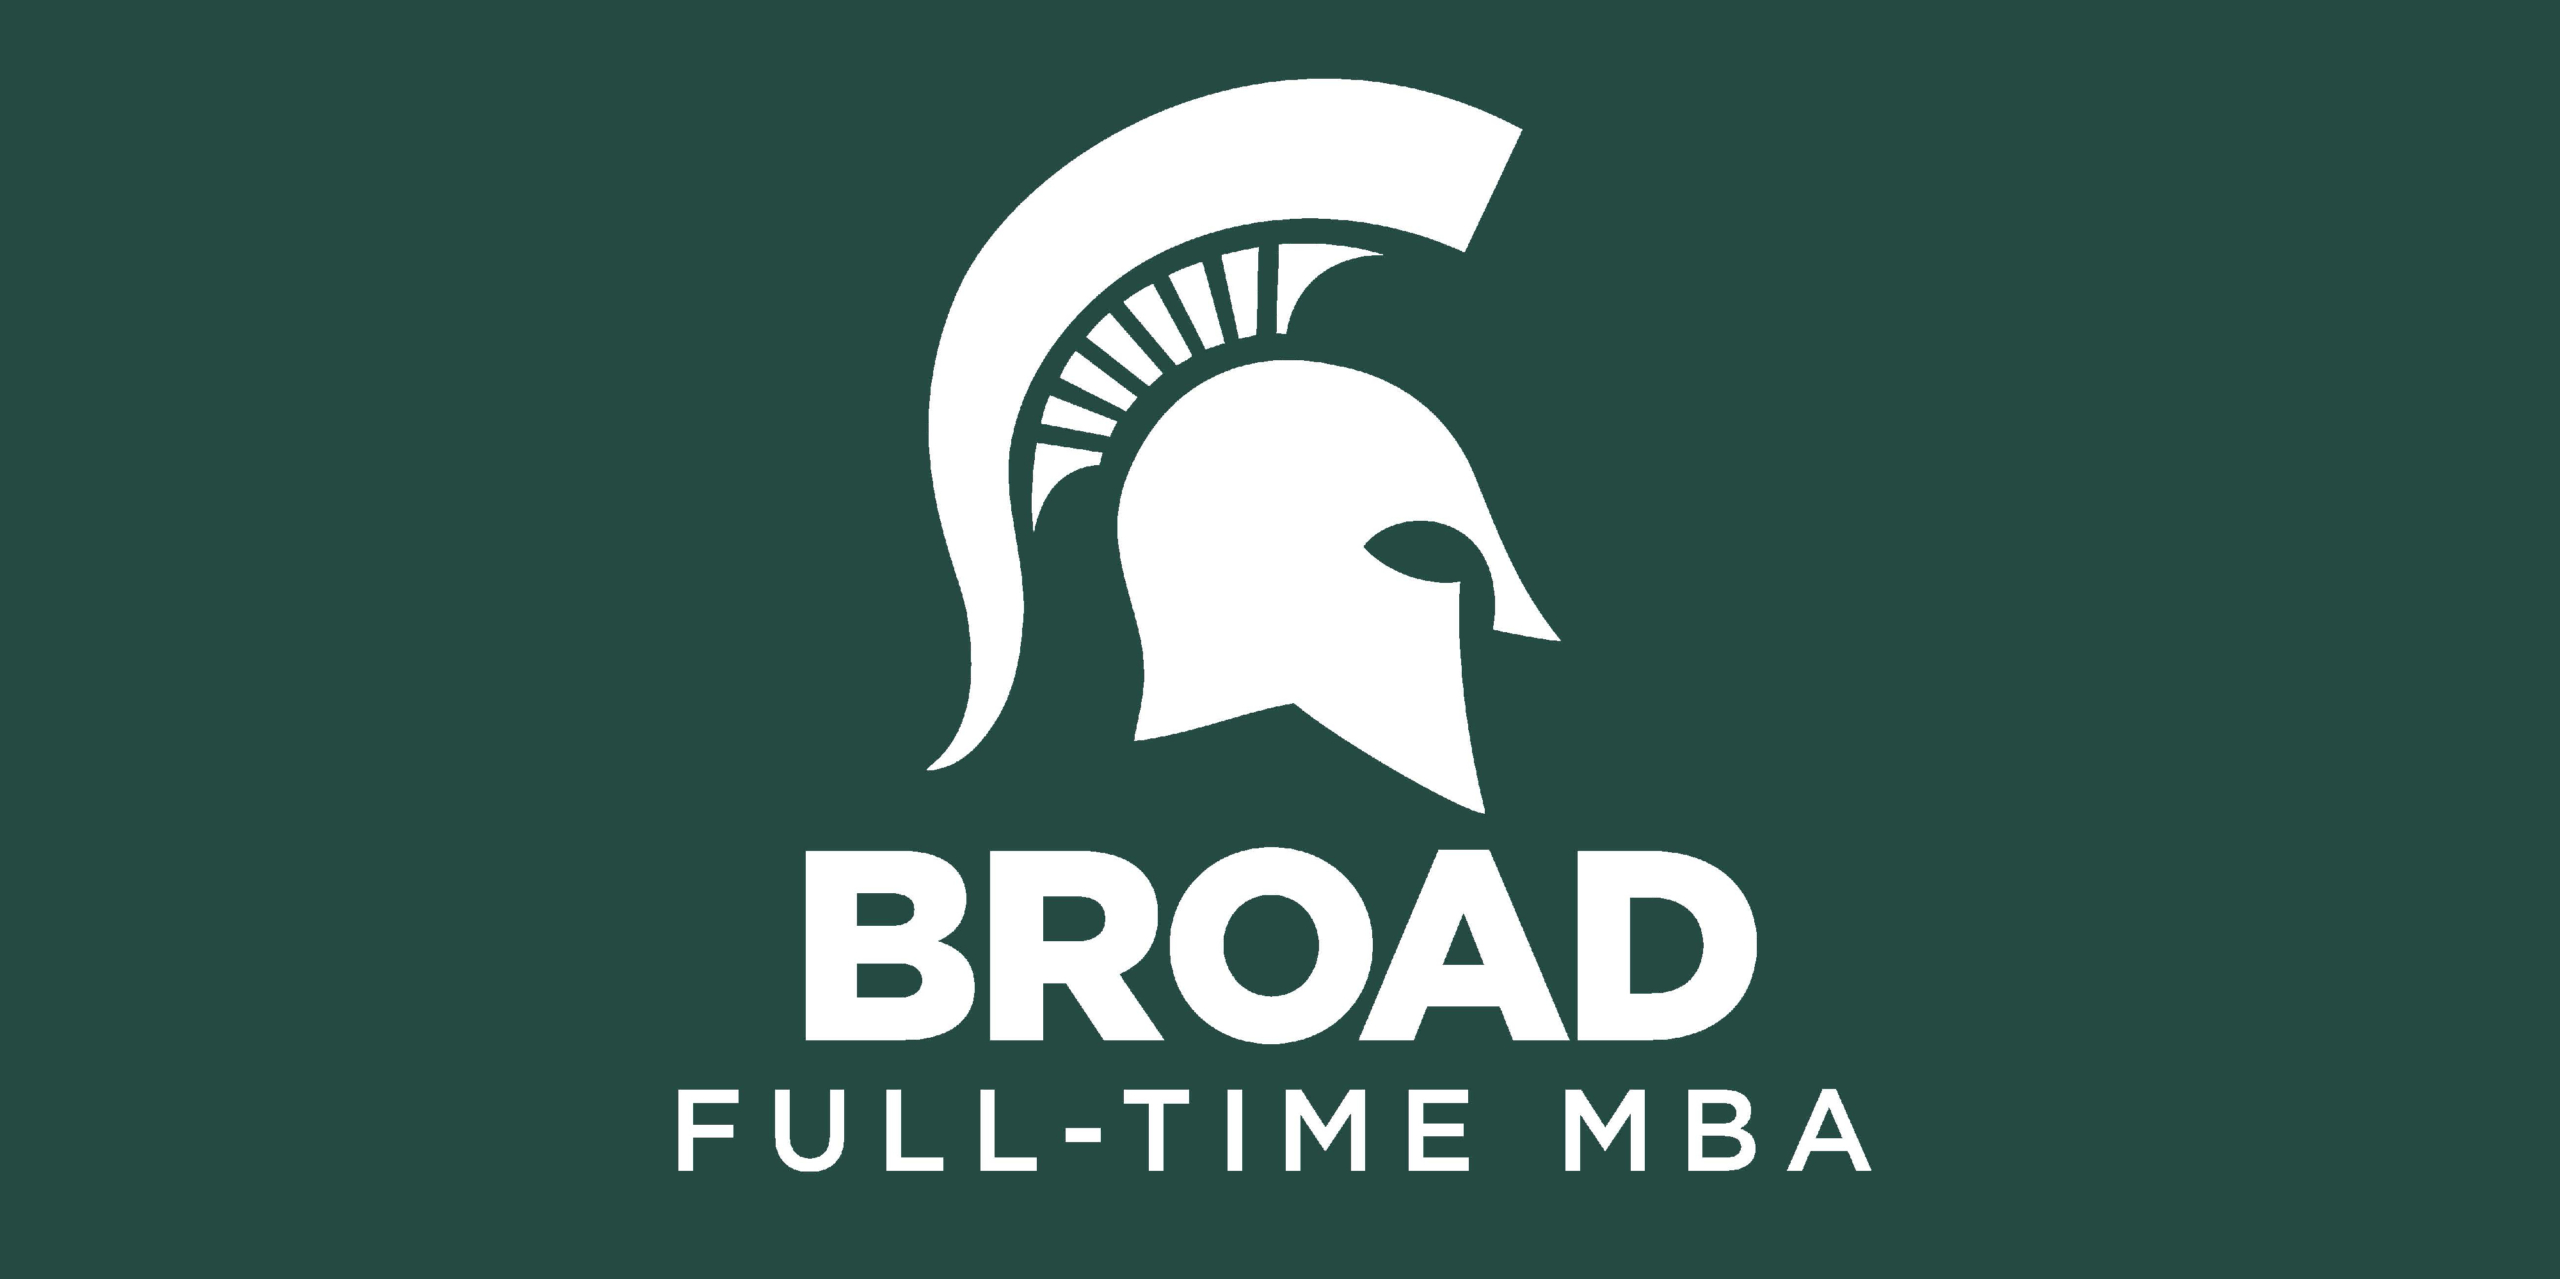 Poets&Quants - Michigan State University's Eli Broad College of Business